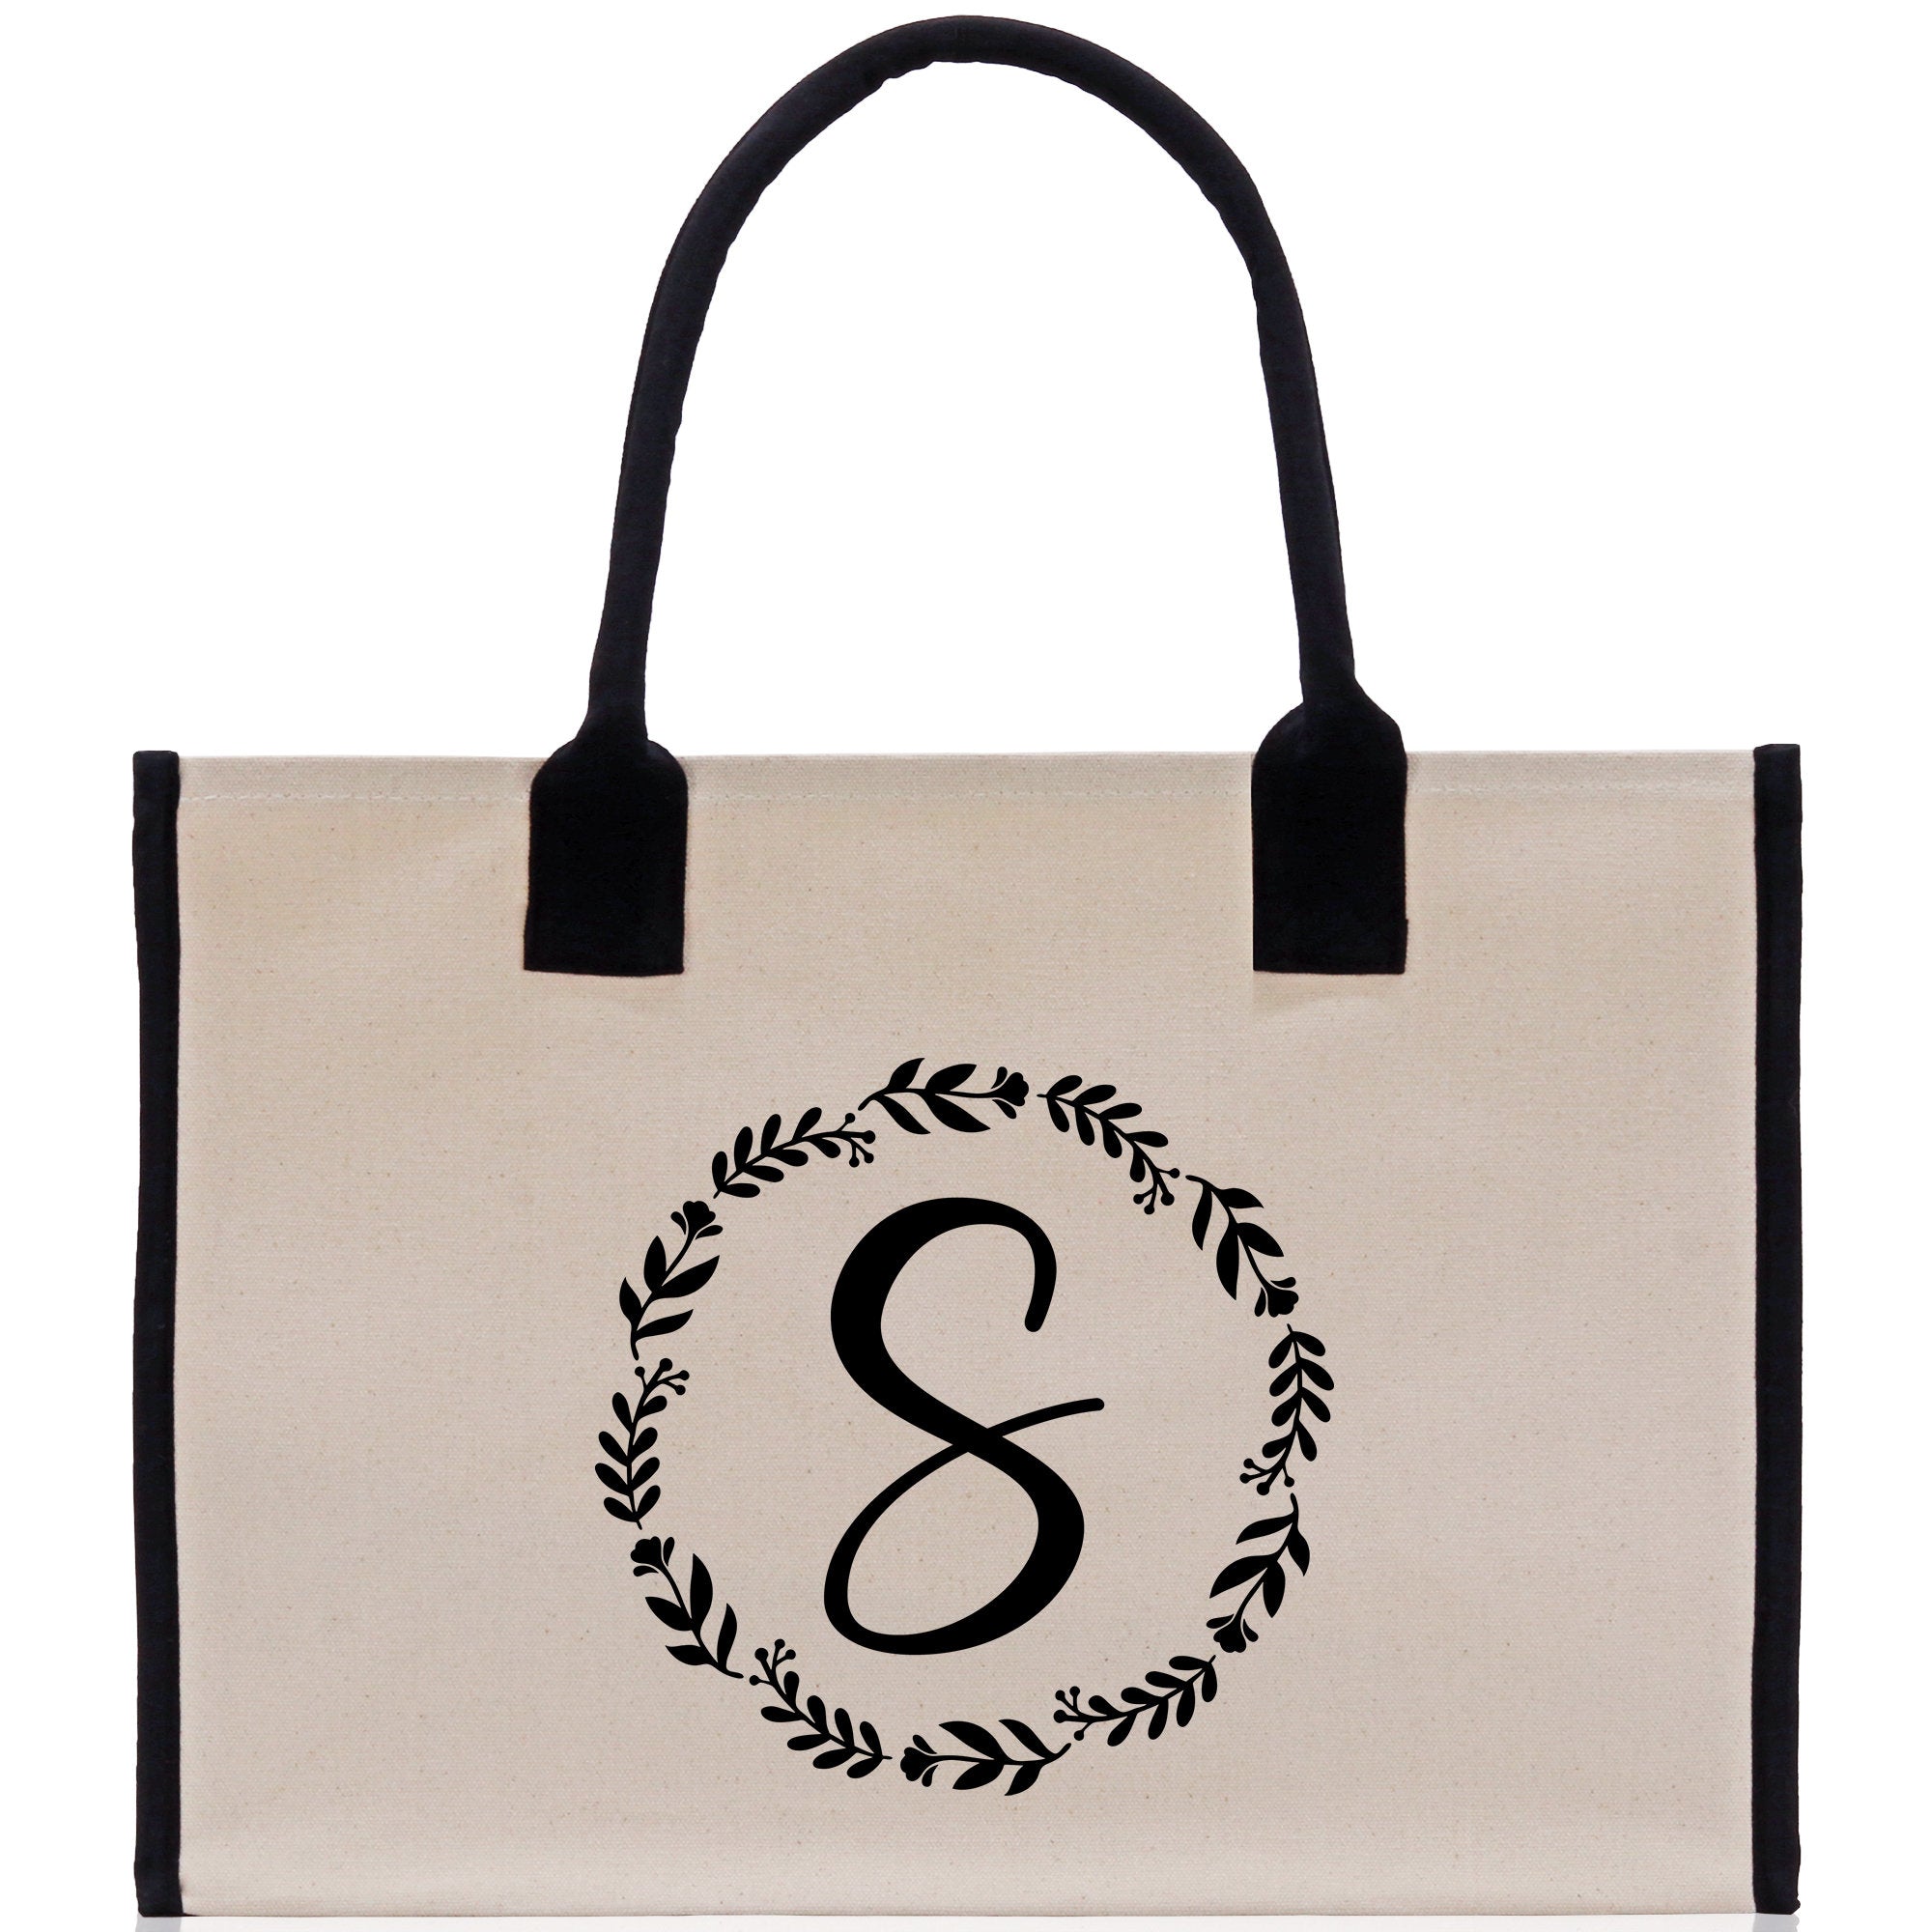 Monogram Beach Canvas Tote Bag Initial Tote Bag Letter Tote Bag Birthday Gift Personalized Tote Bag Personalized Beach Bag Monogrammed Bag